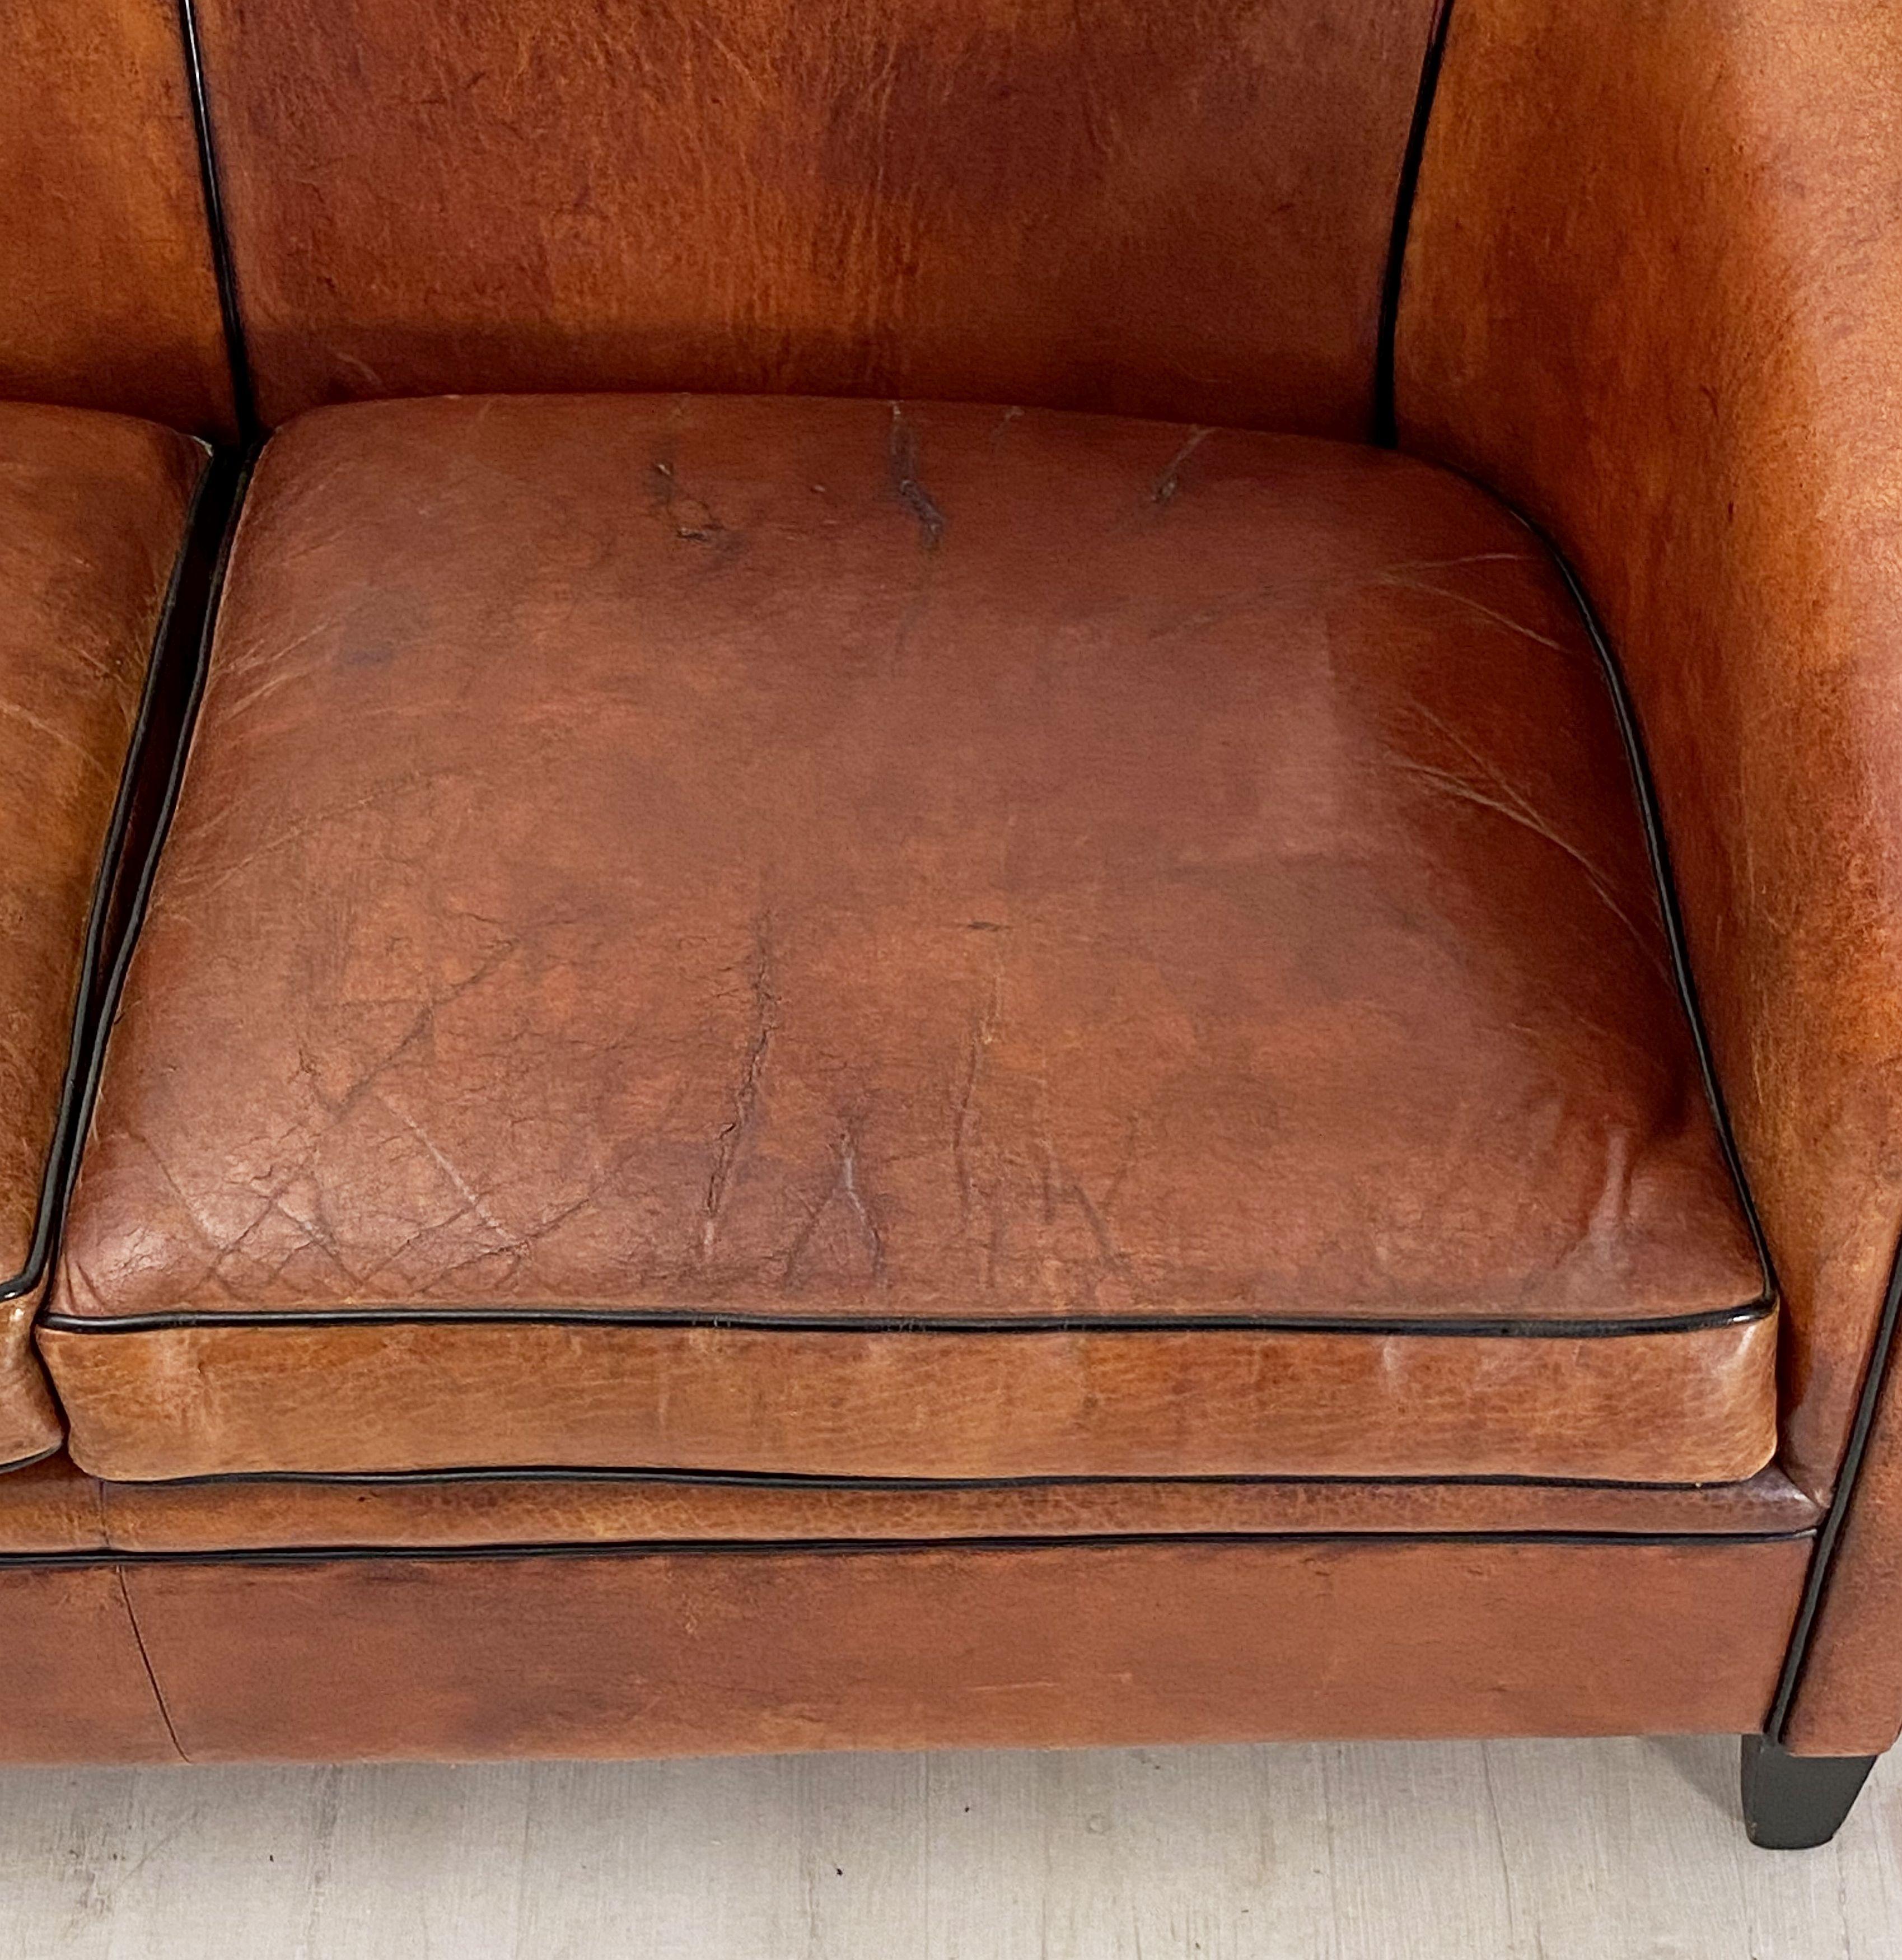 20th Century Dutch Upholstered Leather Sofa or Settee in the Art Deco Style